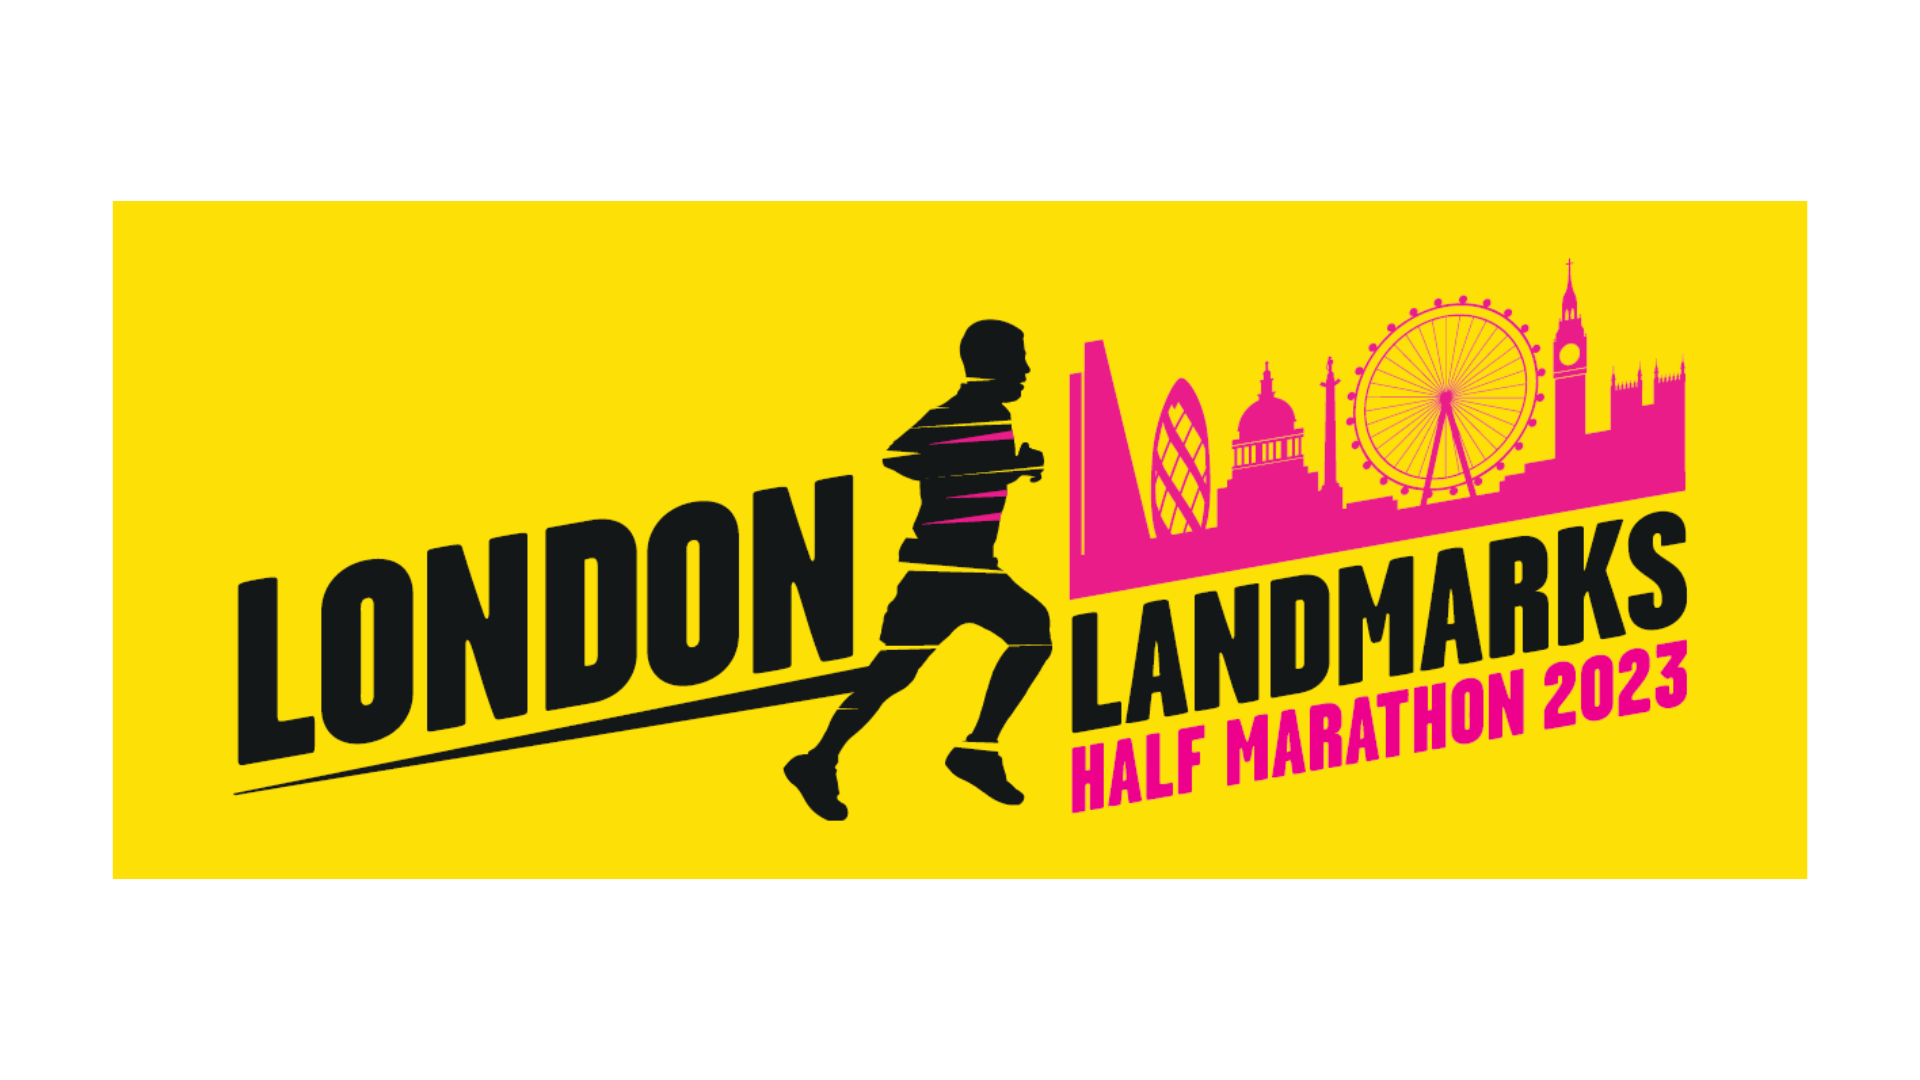 A bright yellow background, showing a drawing of a person running in black and the logo of London landmarks.